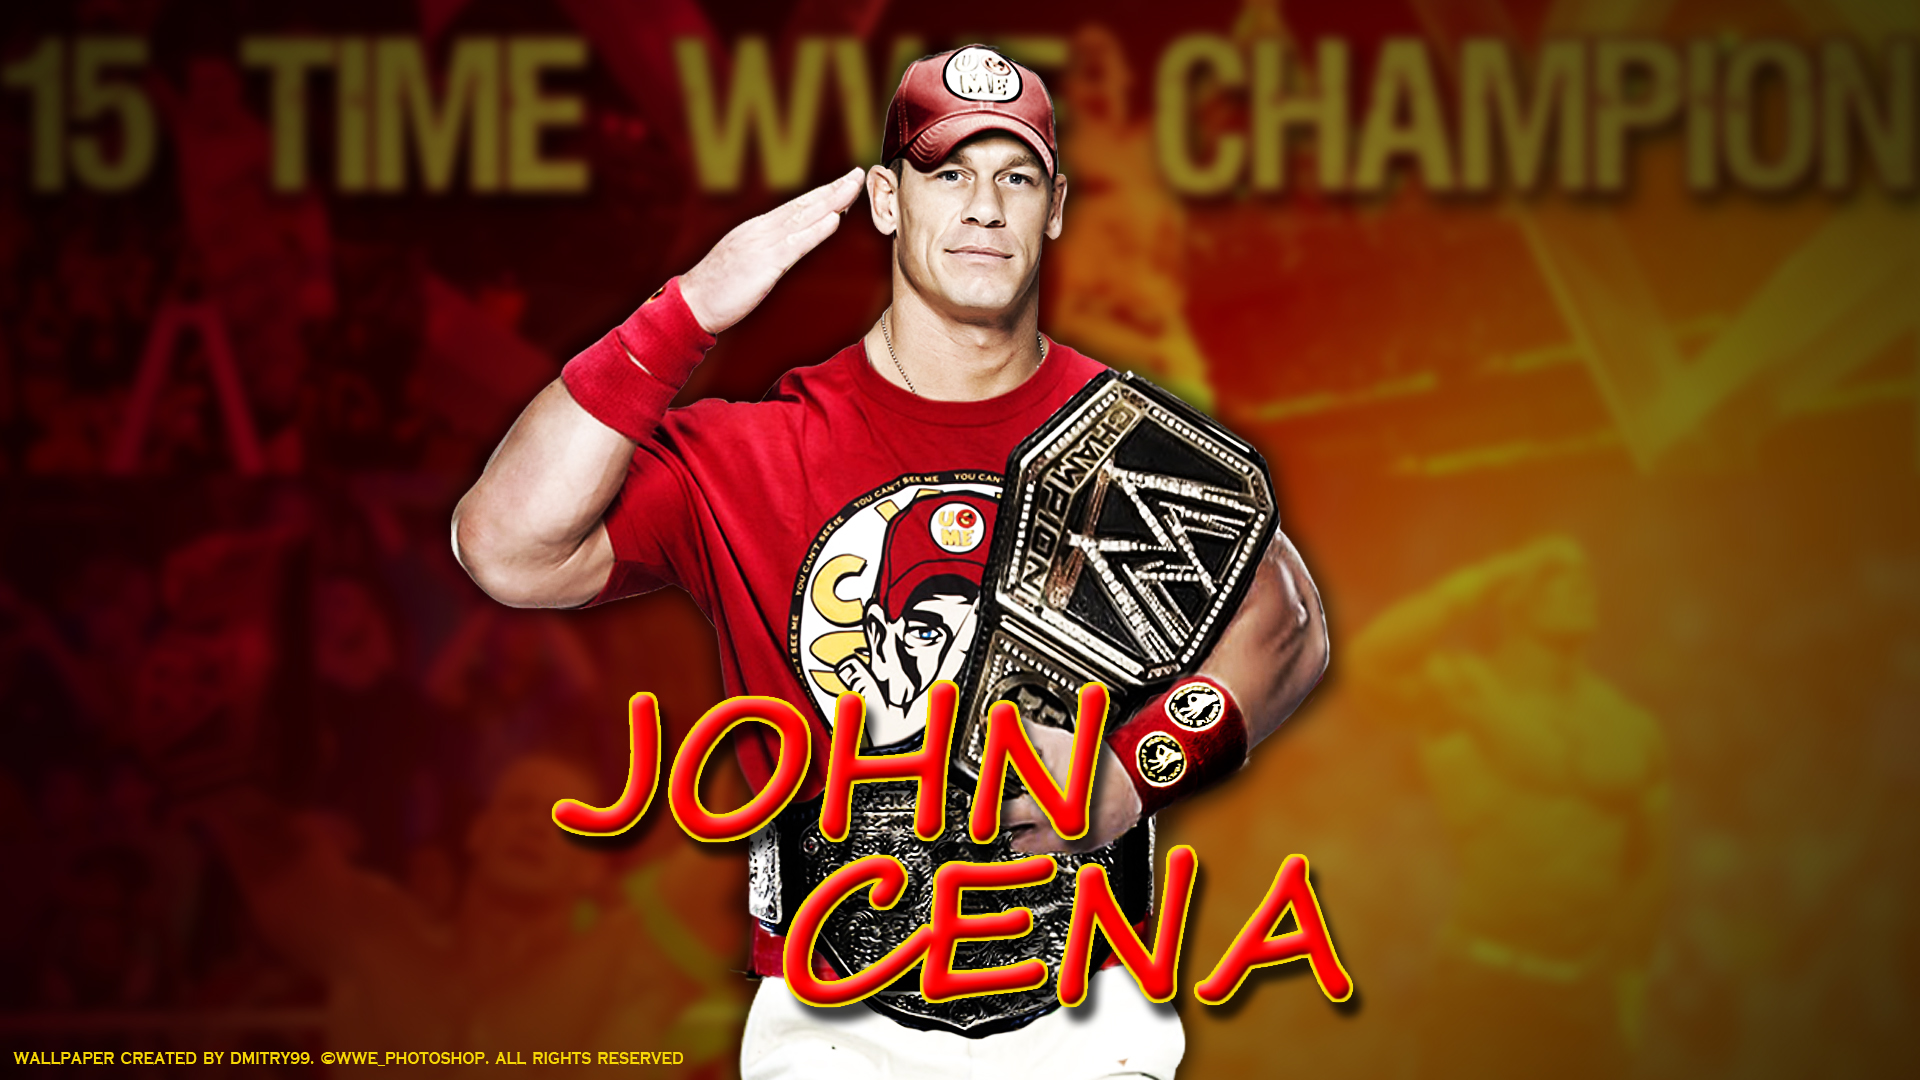 Free download WWE John Cena Wallpapers 2015 HD [1920x1080] for your